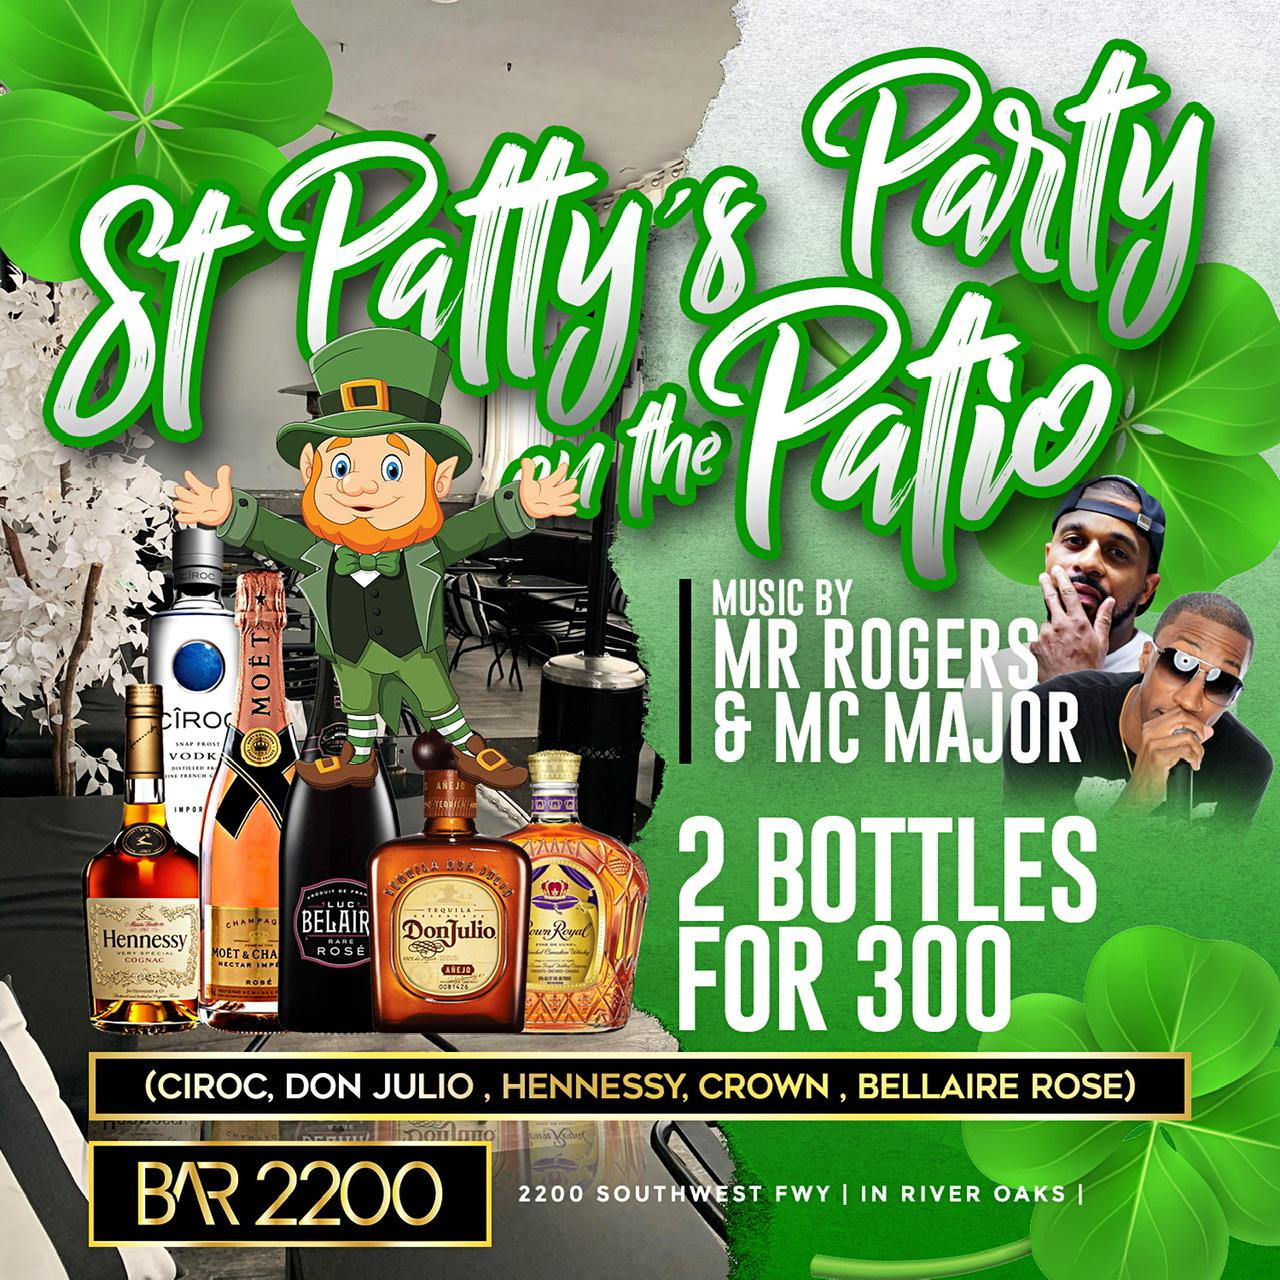 ST PATTY DAY AT BAR 2200 | SOULFOOD TACO TUESDAY |2 BOTTLE FOR 300 | FREE ALL NIGHT | $4 MARTINIS ALL NIGHT | $5 HAPPY HOUR DRINKS + 20 HOOKAHS 5PM - 9PM | DJ MR. ROGERS & MC MAJOR | FOR INFO TEXT 832.338.3829 OR @Bar2200Htx on Instagram